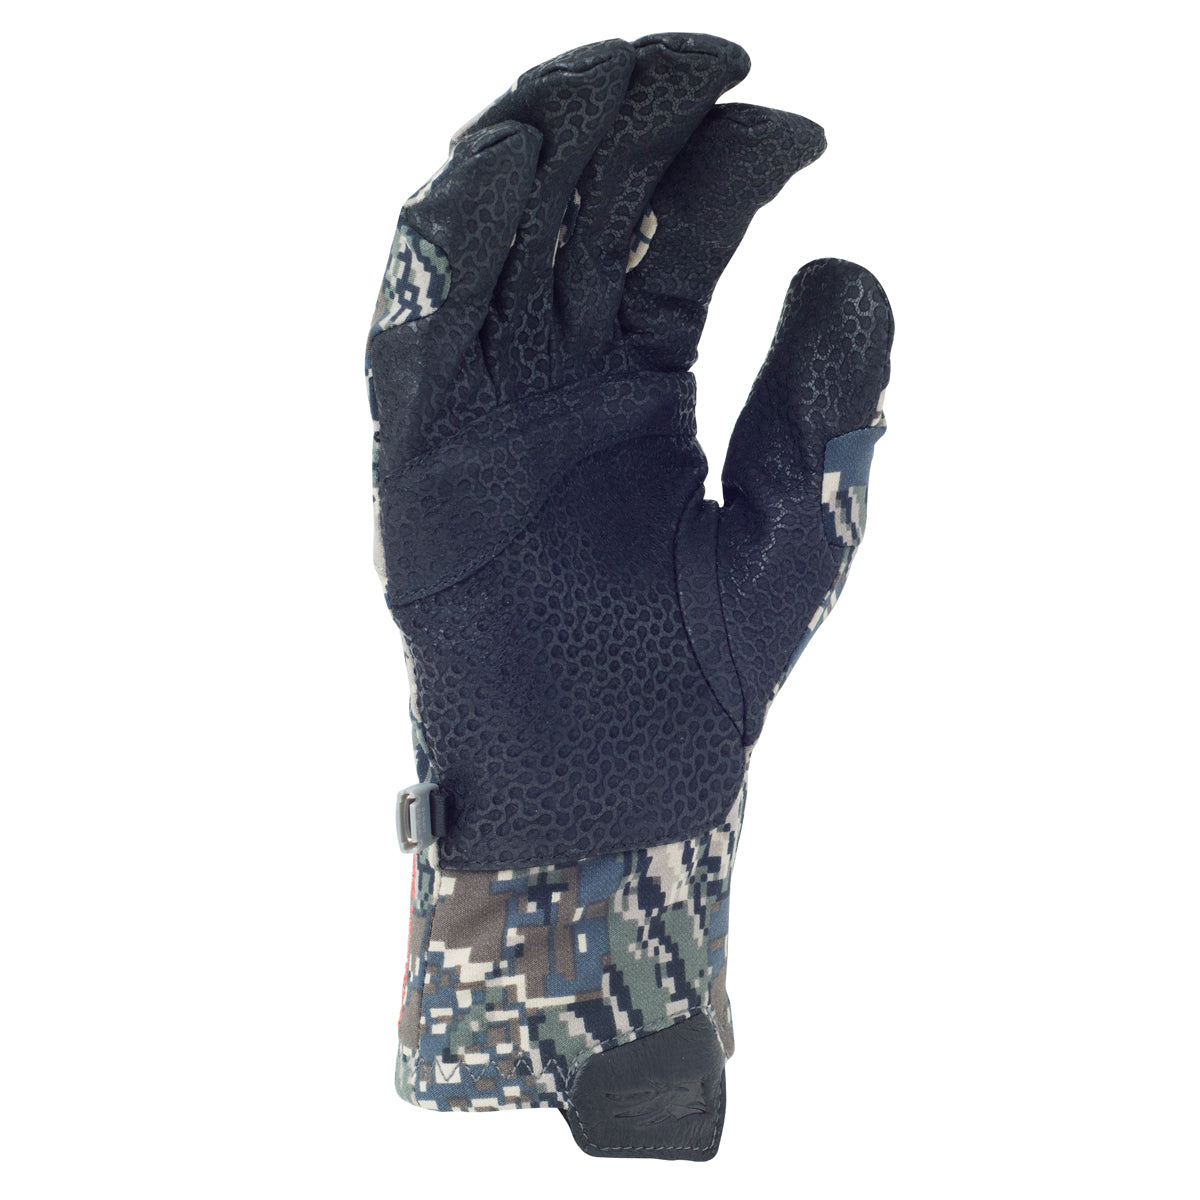 Sitka Mountain Glove in Sitka Mountain Glove by Sitka | Apparel - goHUNT Shop by GOHUNT | Sitka - GOHUNT Shop